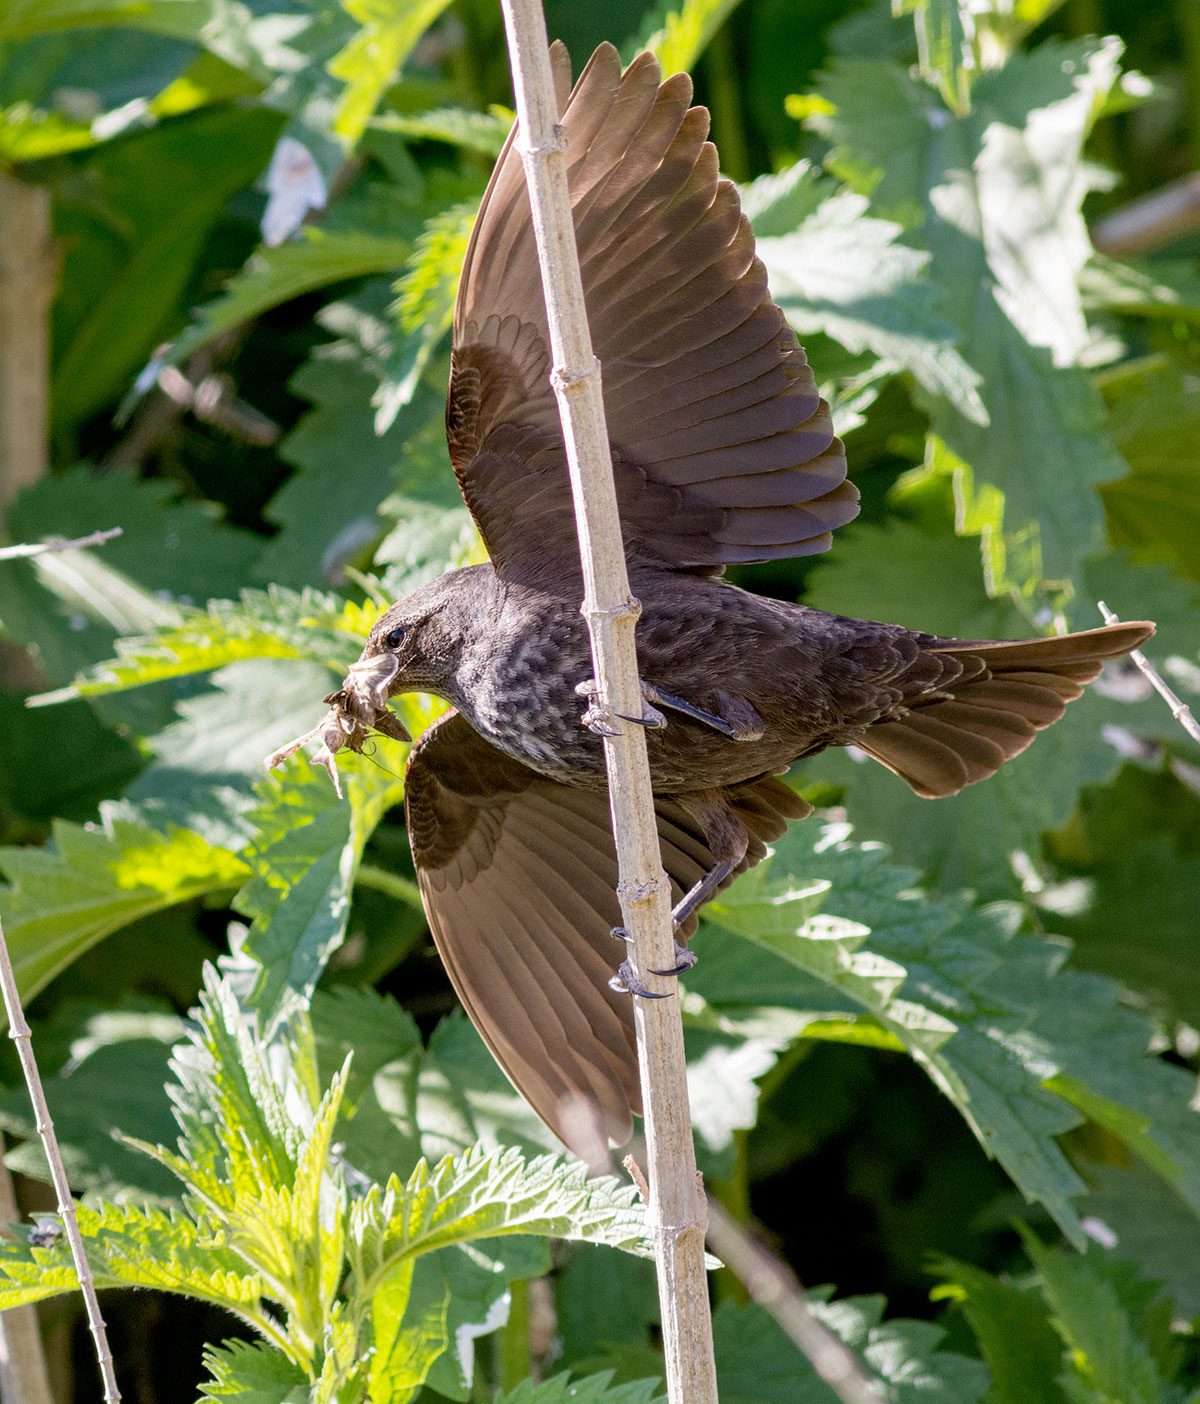 A female Tricolored Blackbird brings protein-rich prey to her nestlings. Photo by Harold Epstein;